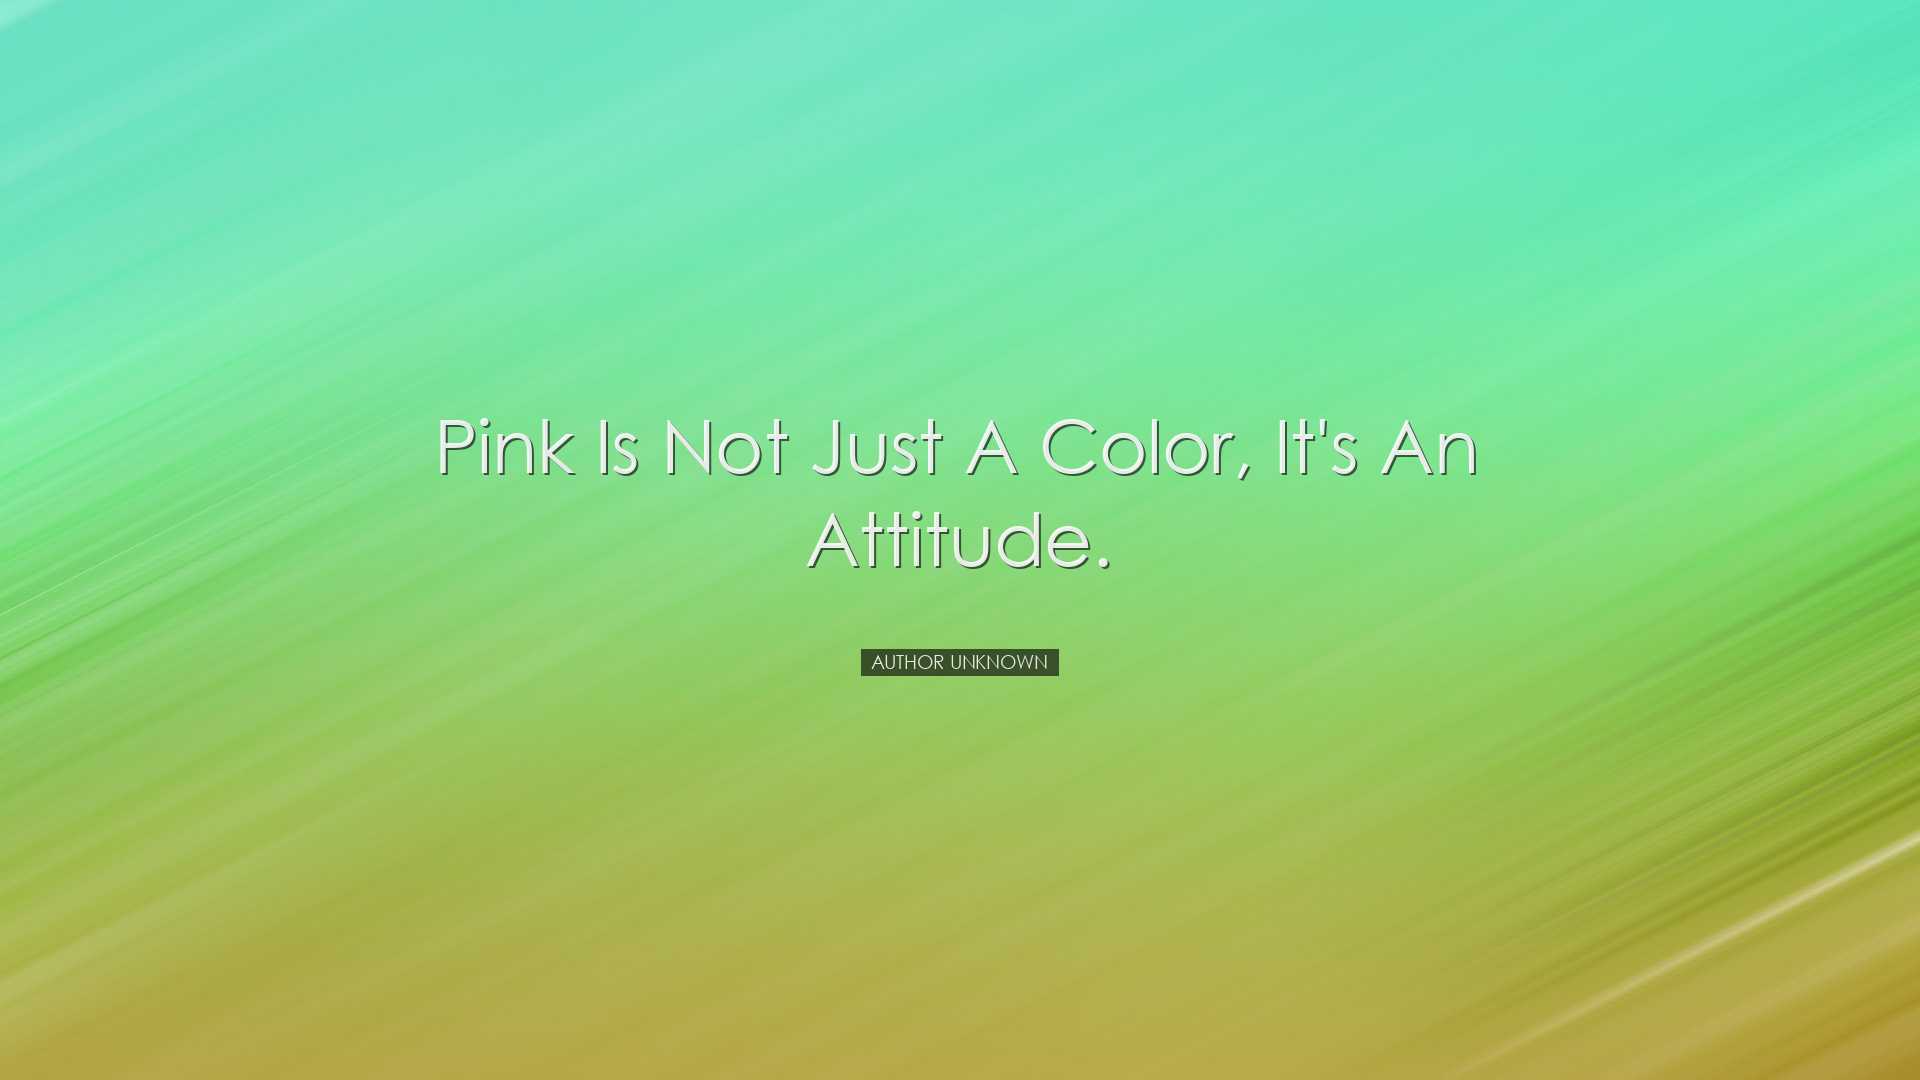 Pink is not just a color, it's an attitude. - Author Unknown